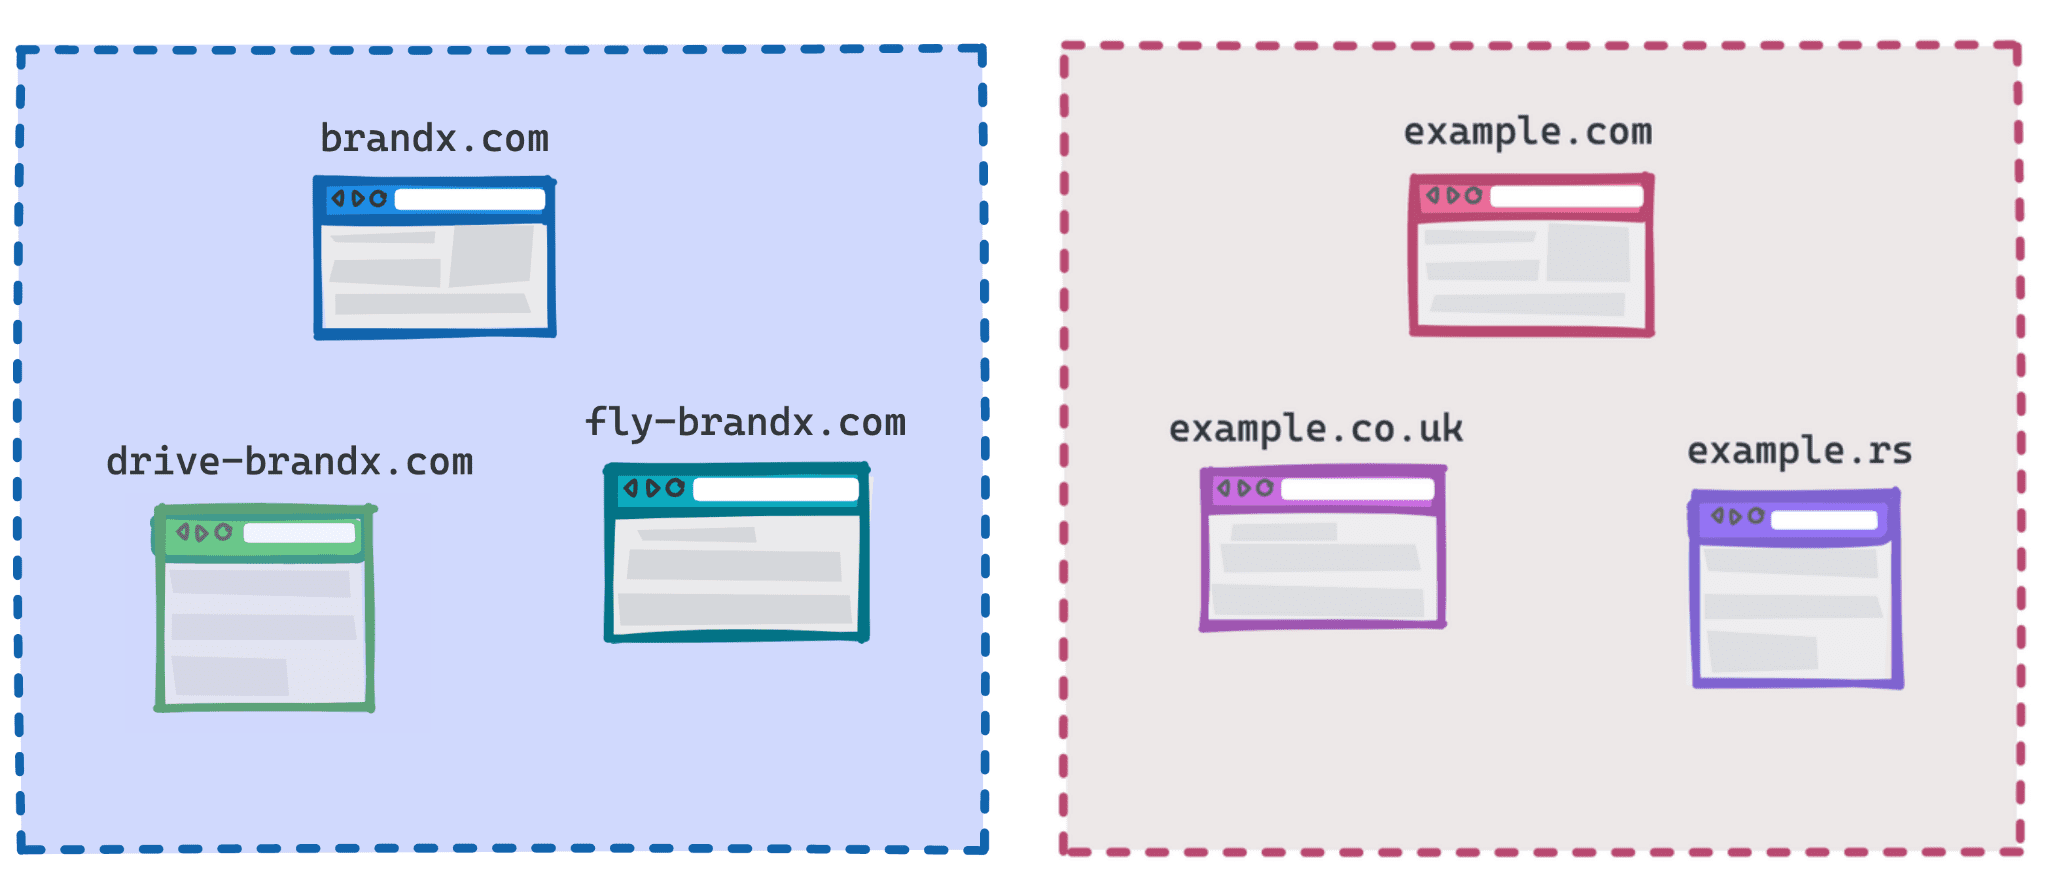 Diagram showing brandx.com, fly-brandx.com and drive-brandx.com as one group and example.com, example.rs, example.co.uk as another group.